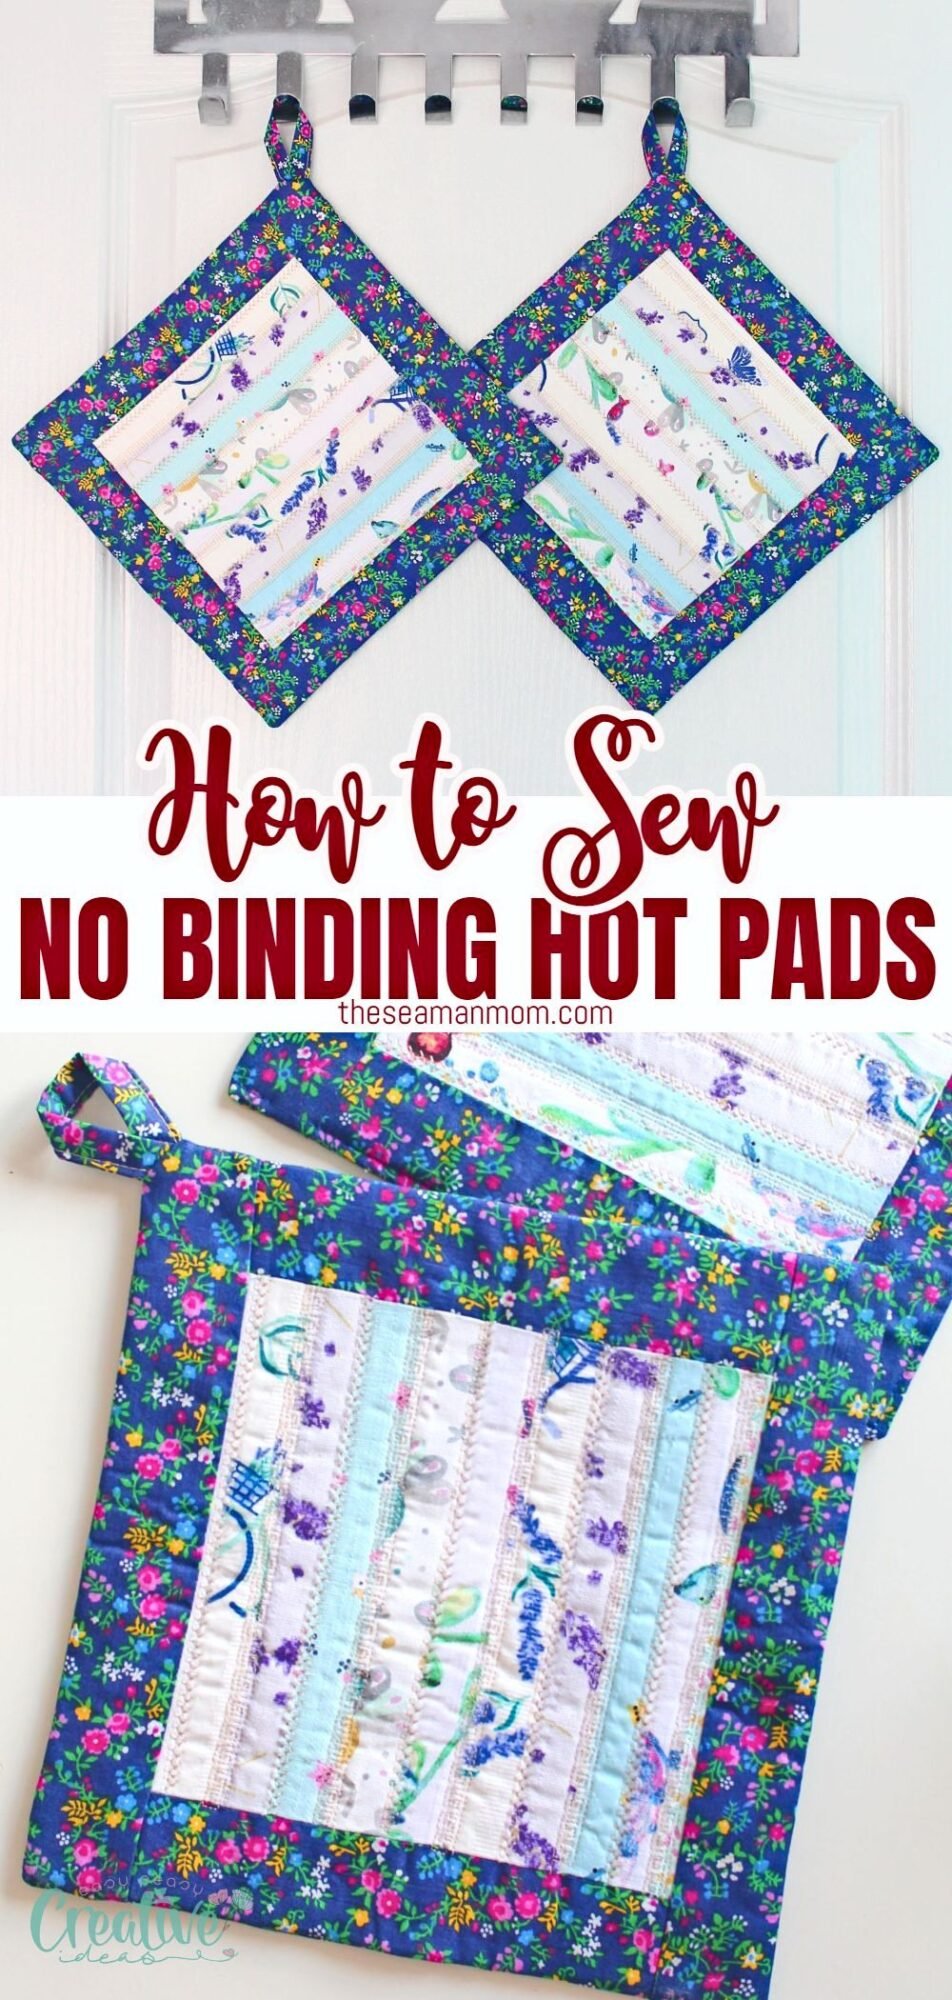 No binding hot pads: Sew stylish and functional hot pads without the hassle of bias binding. Learn how in this easy tutorial!